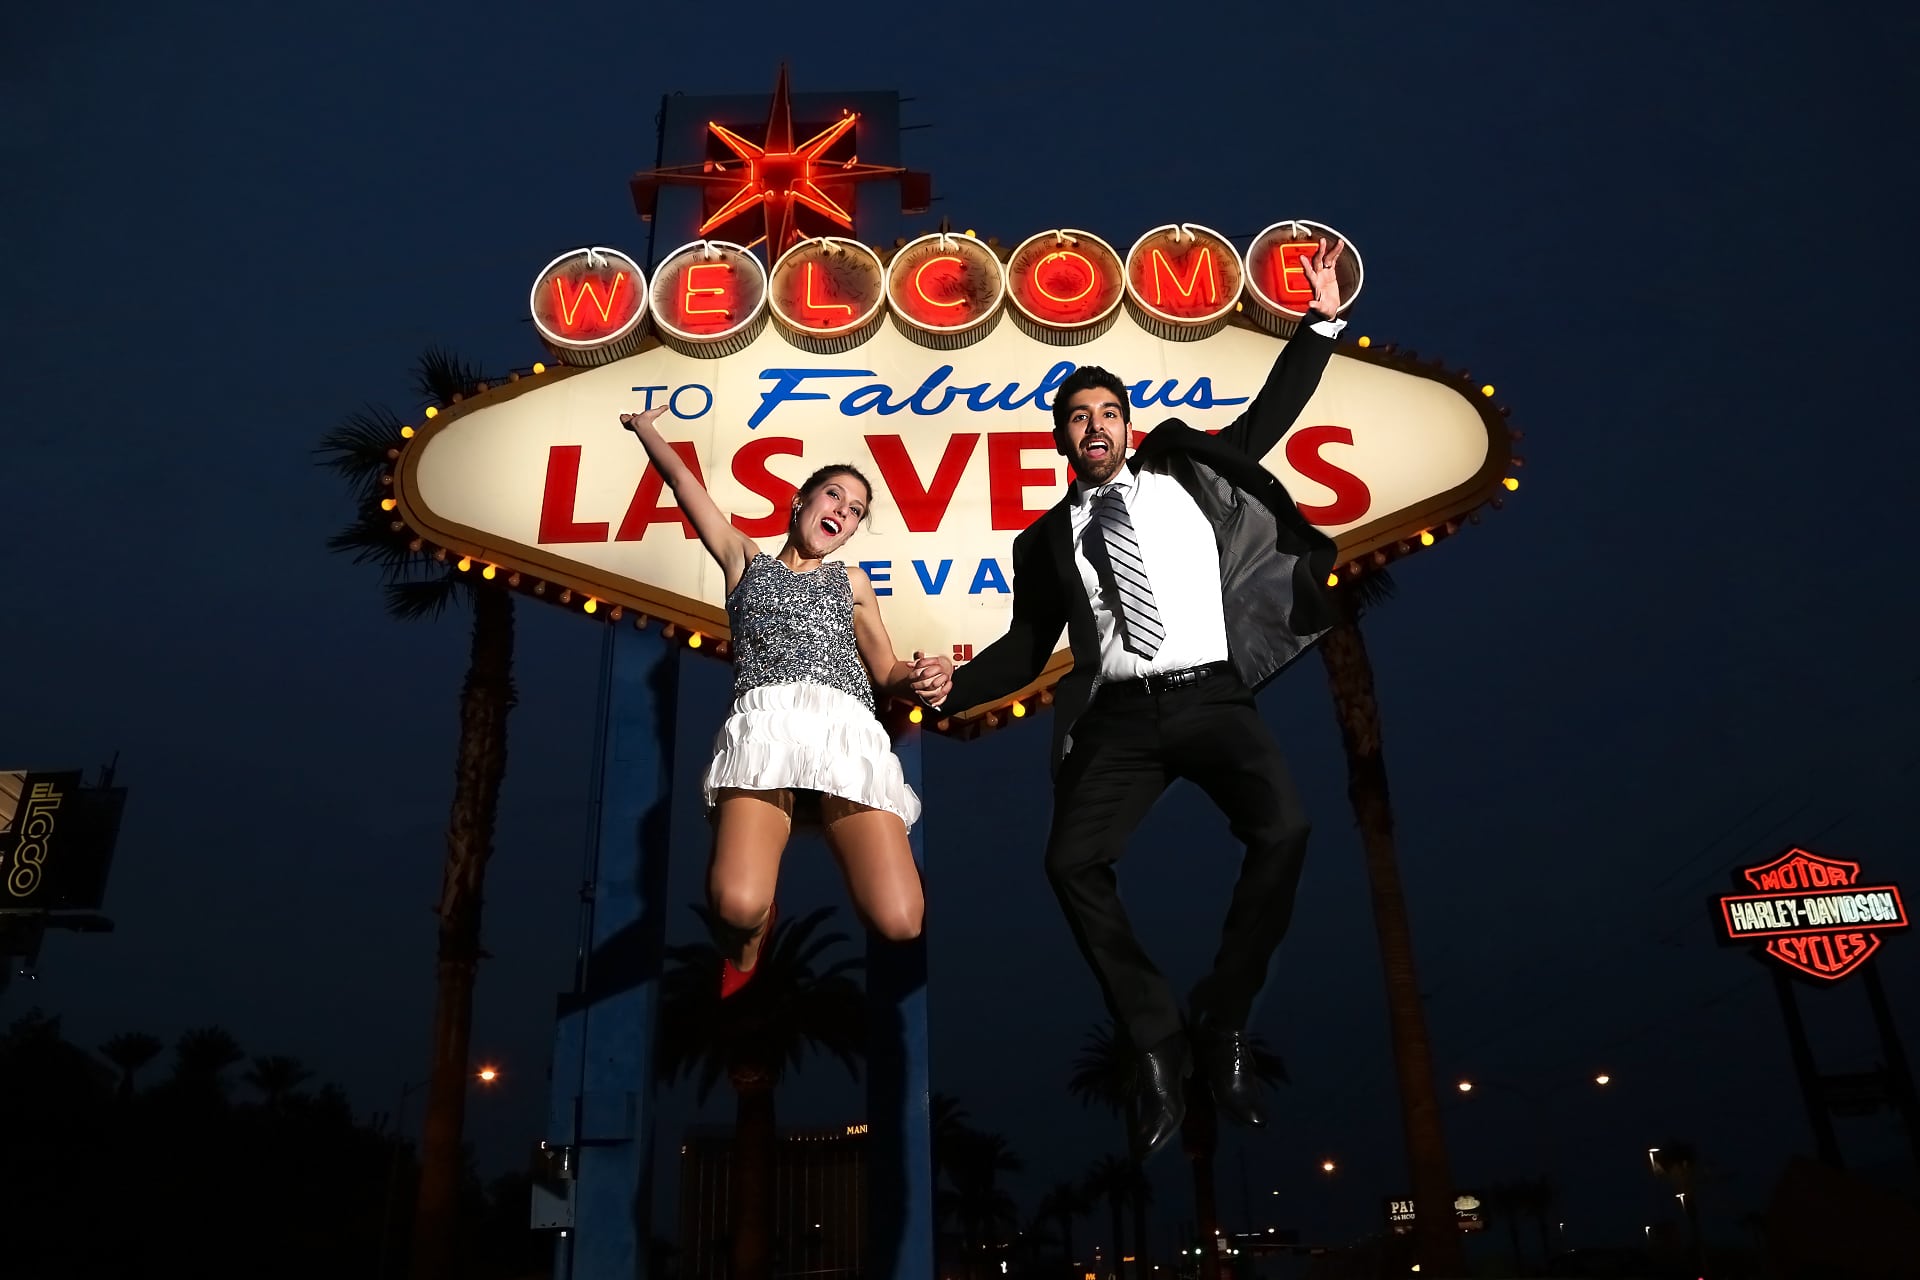 A couple jumping in front of the welcome to las vegas sign.